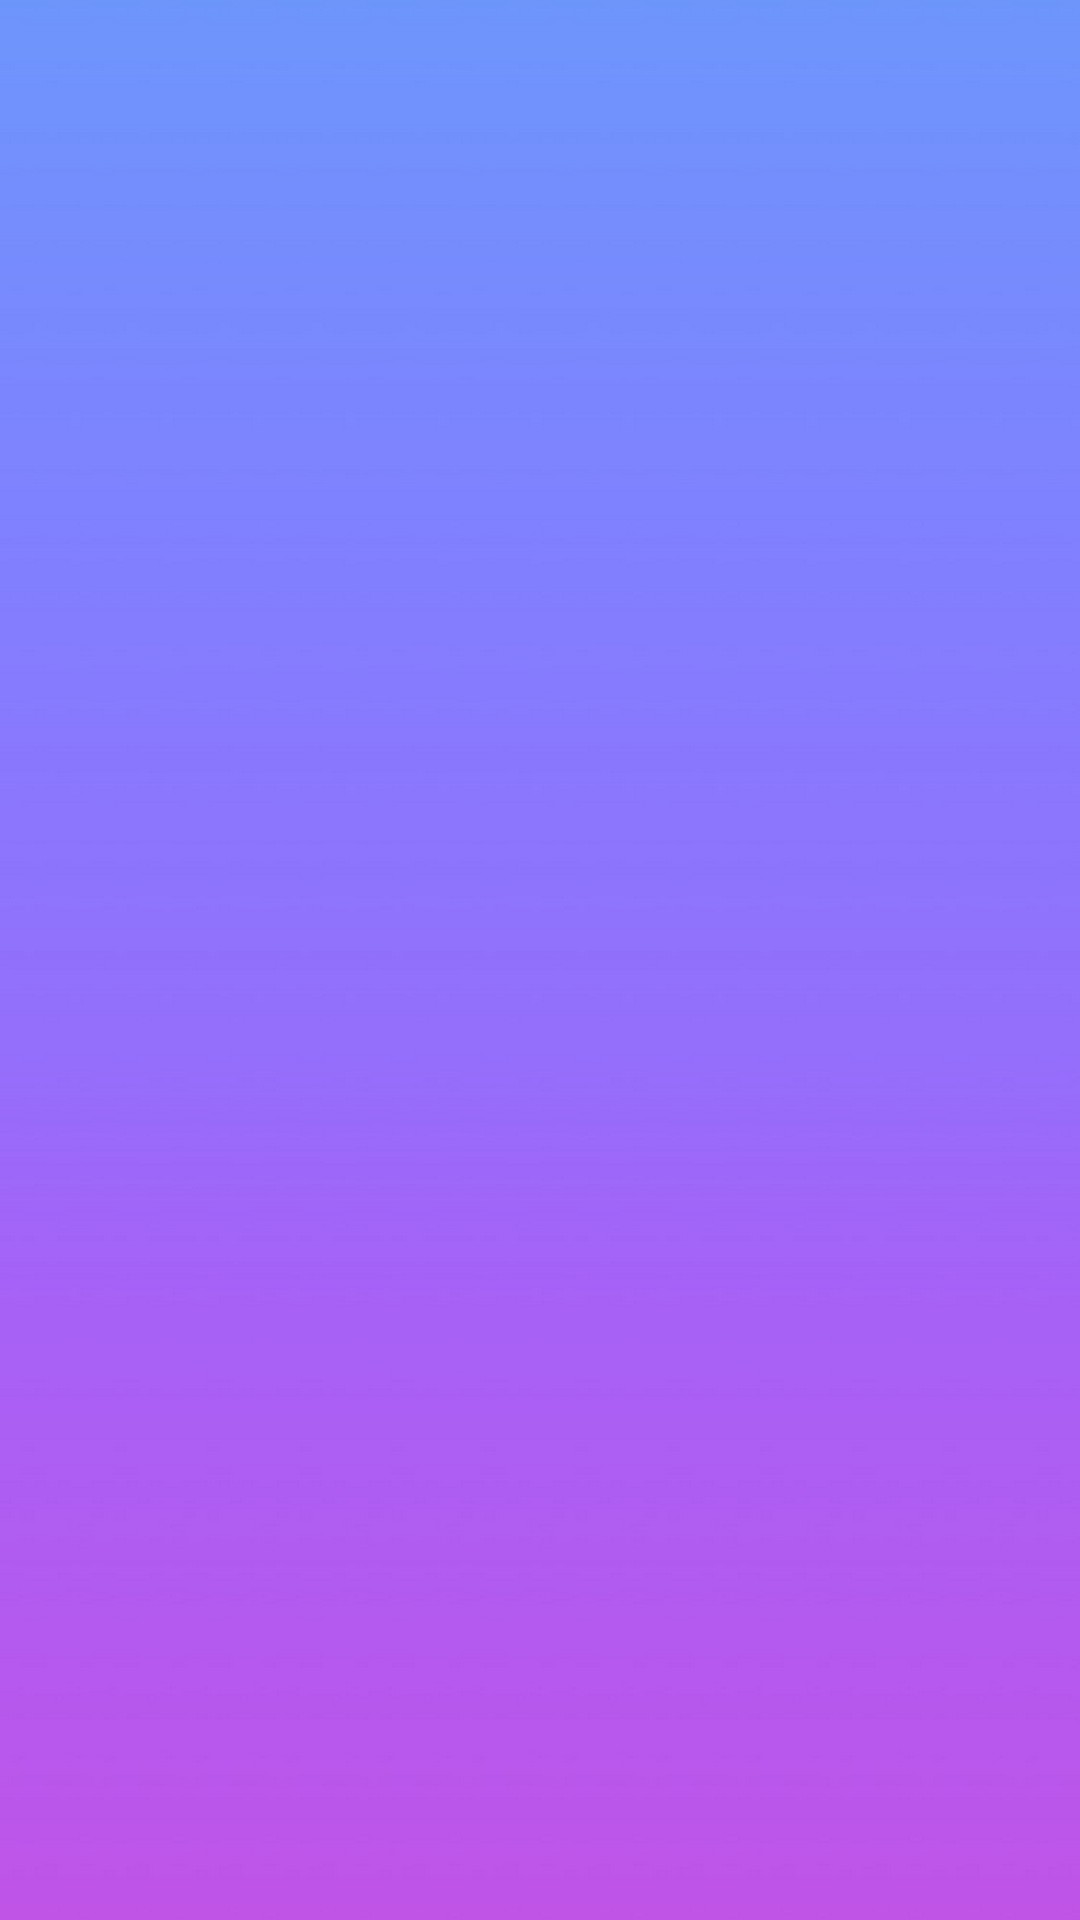 Gradient Wallpaper For Iphone With High-resolution - Purple Gradient Wallpaper For Iphone - HD Wallpaper 